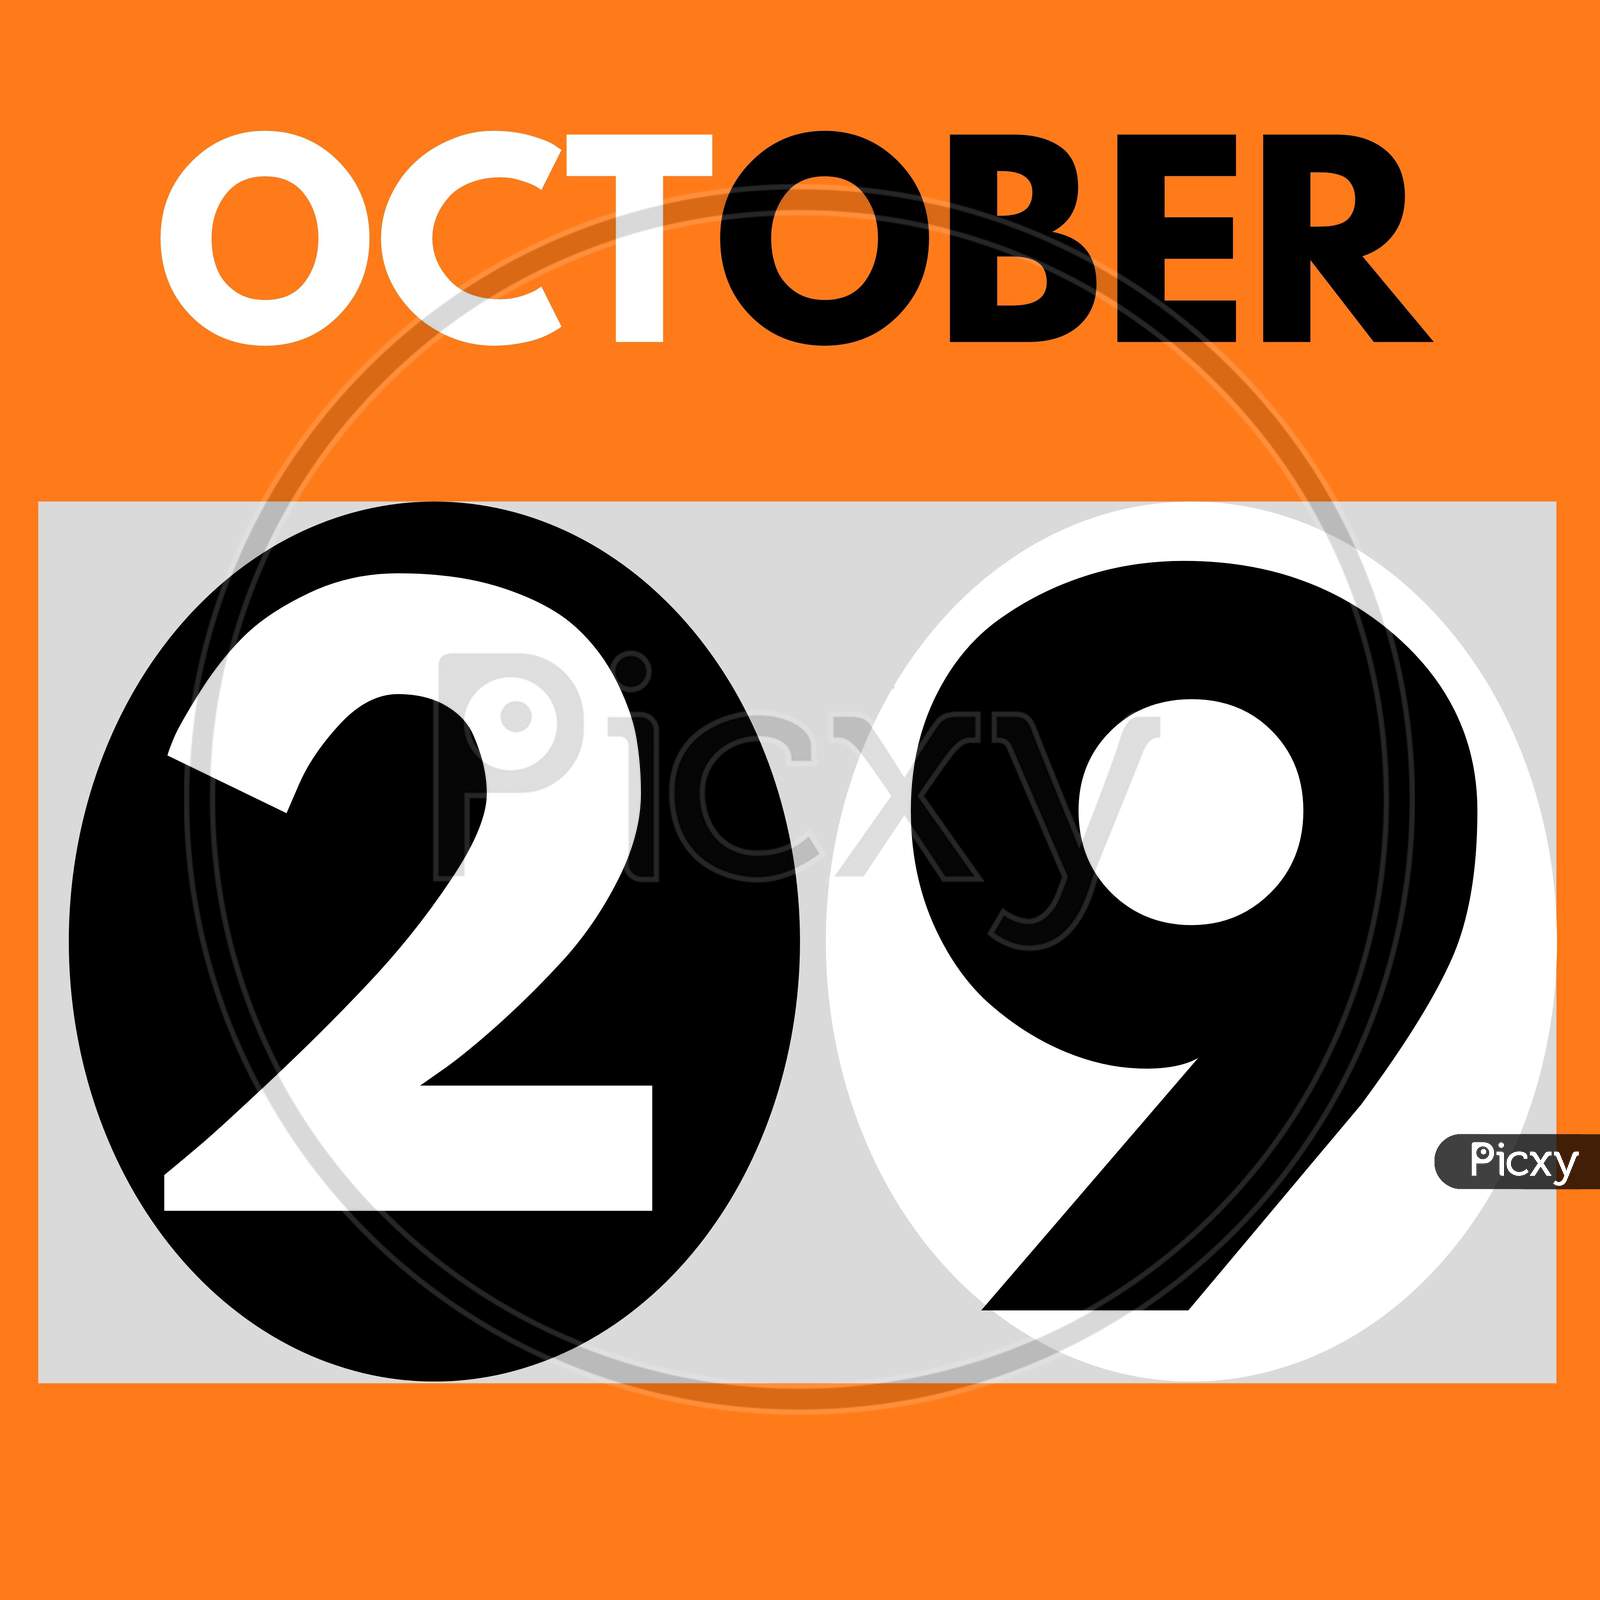 October 29 . Modern Daily Calendar Icon .Date ,Day, Month .Calendar For The Month Of October